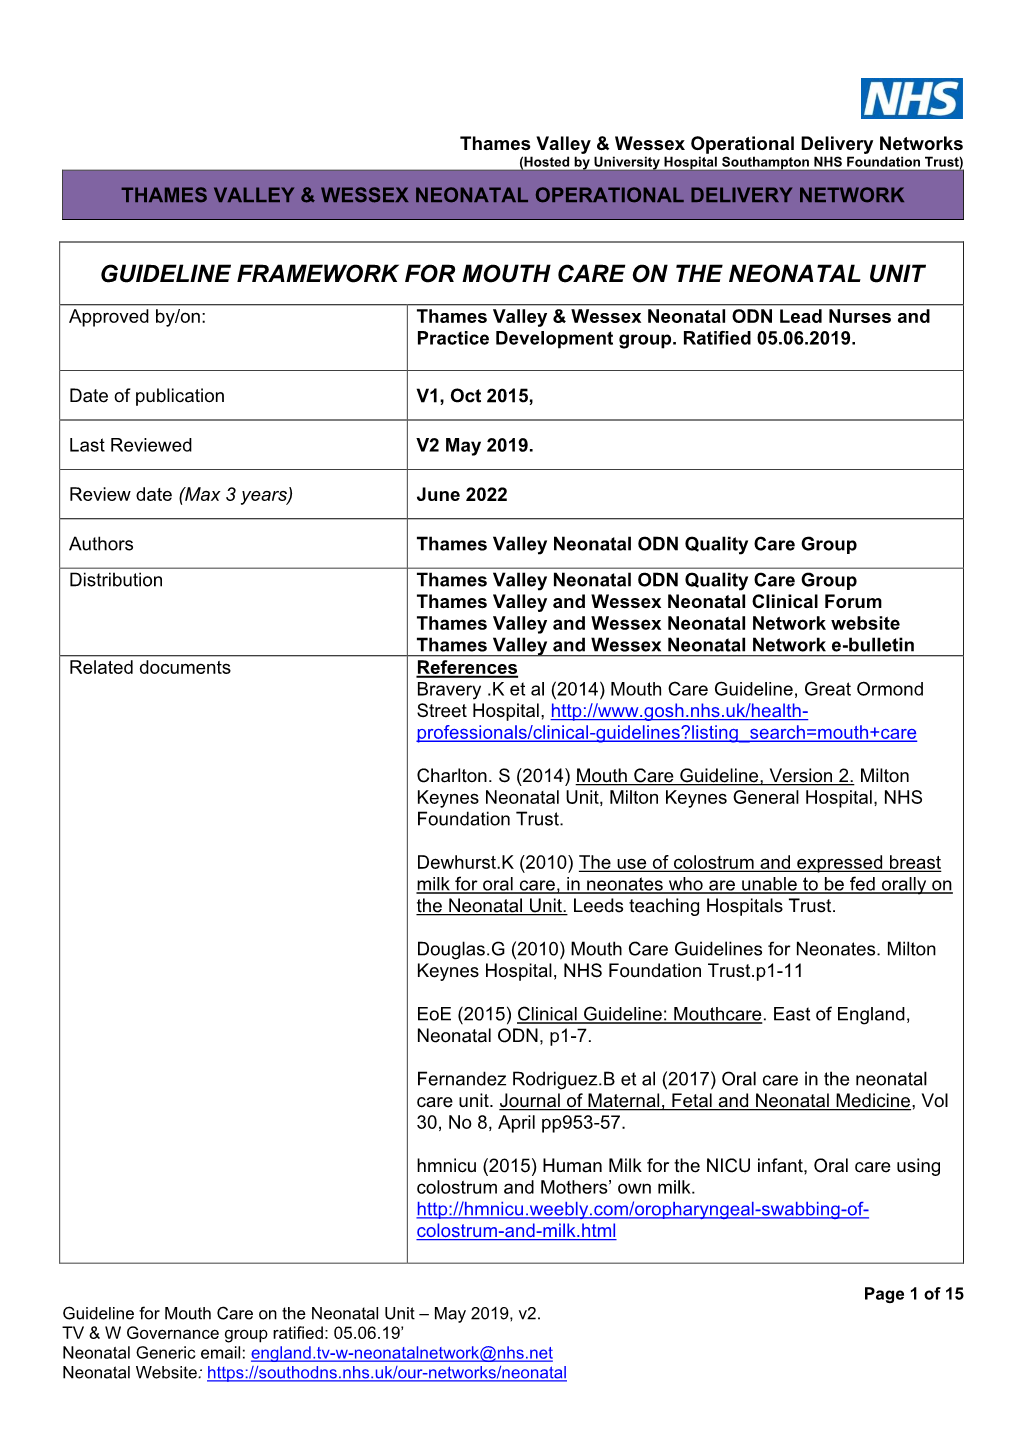 Guideline Framework for Mouth Care on the Neonatal Unit